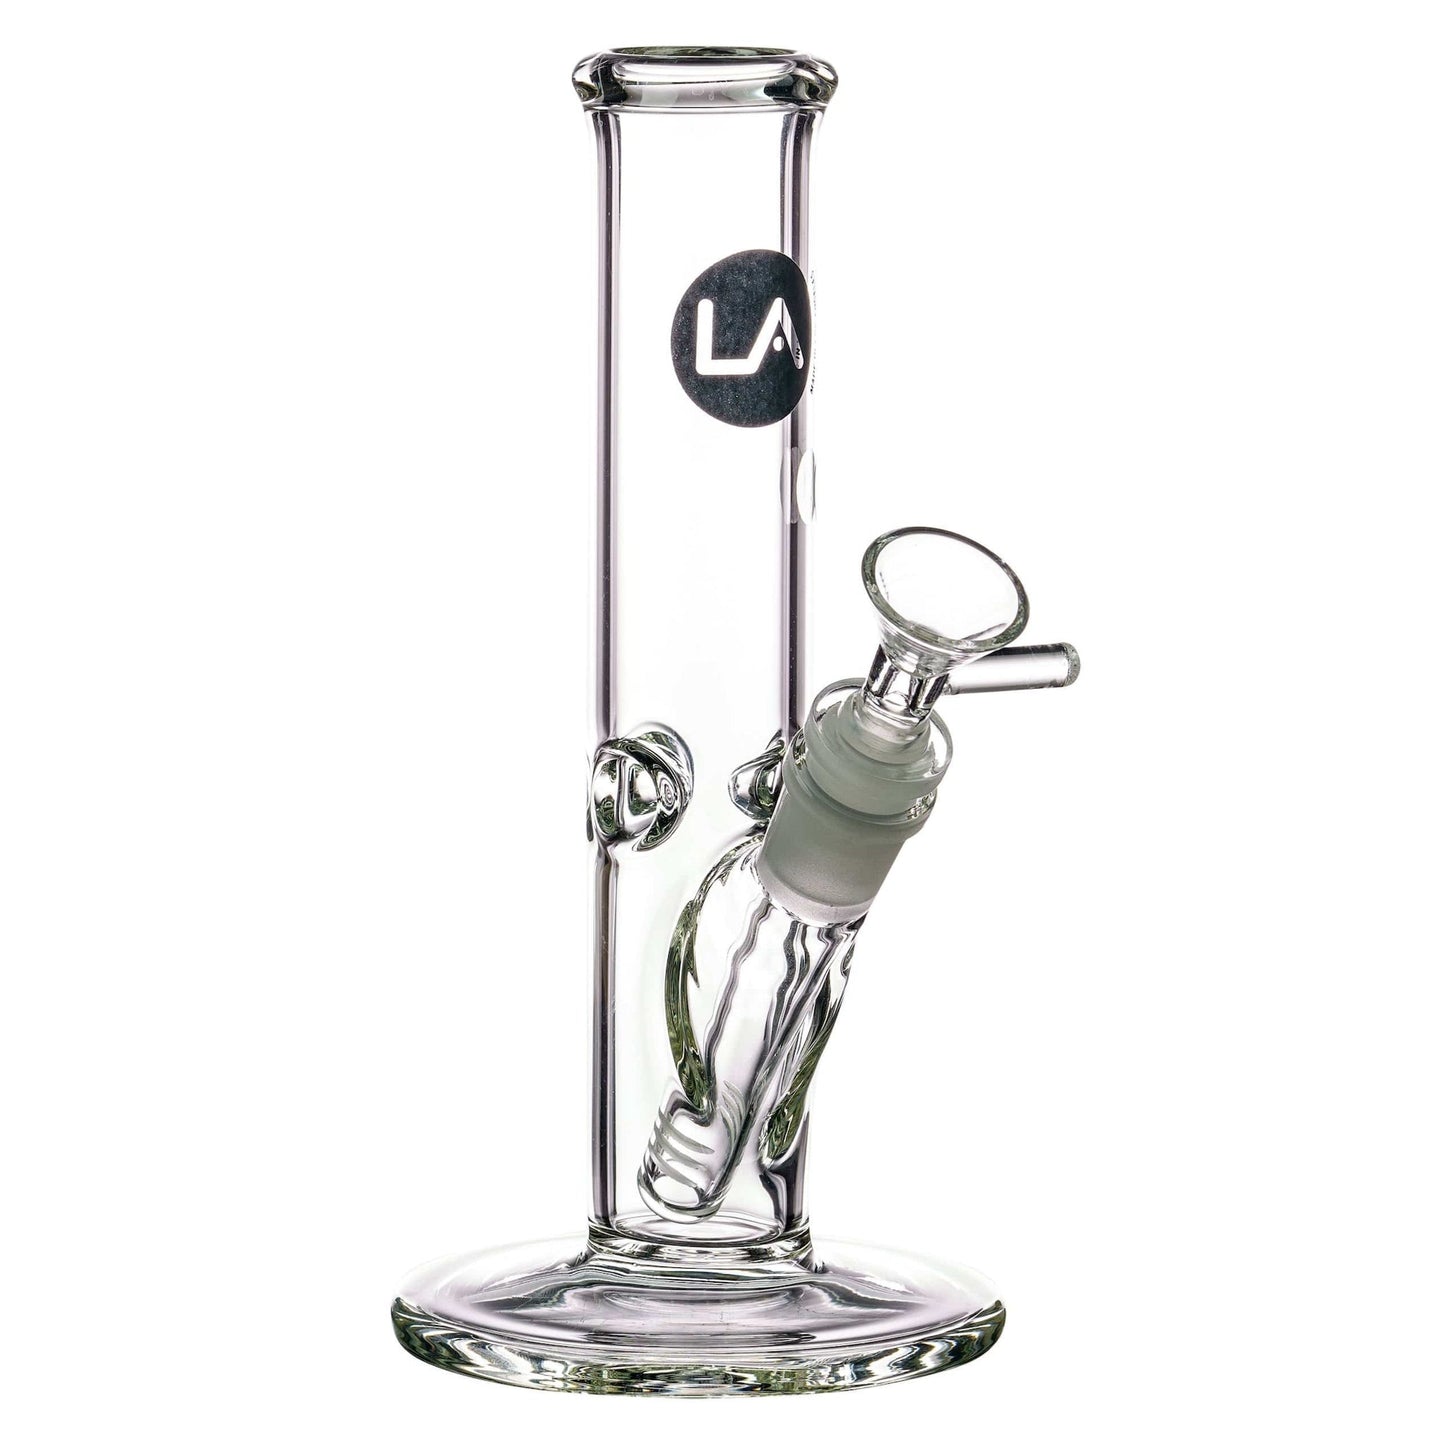 LA Pipes 8” Basic Straight Tube Bong by LA Pipes | Mission Dispensary